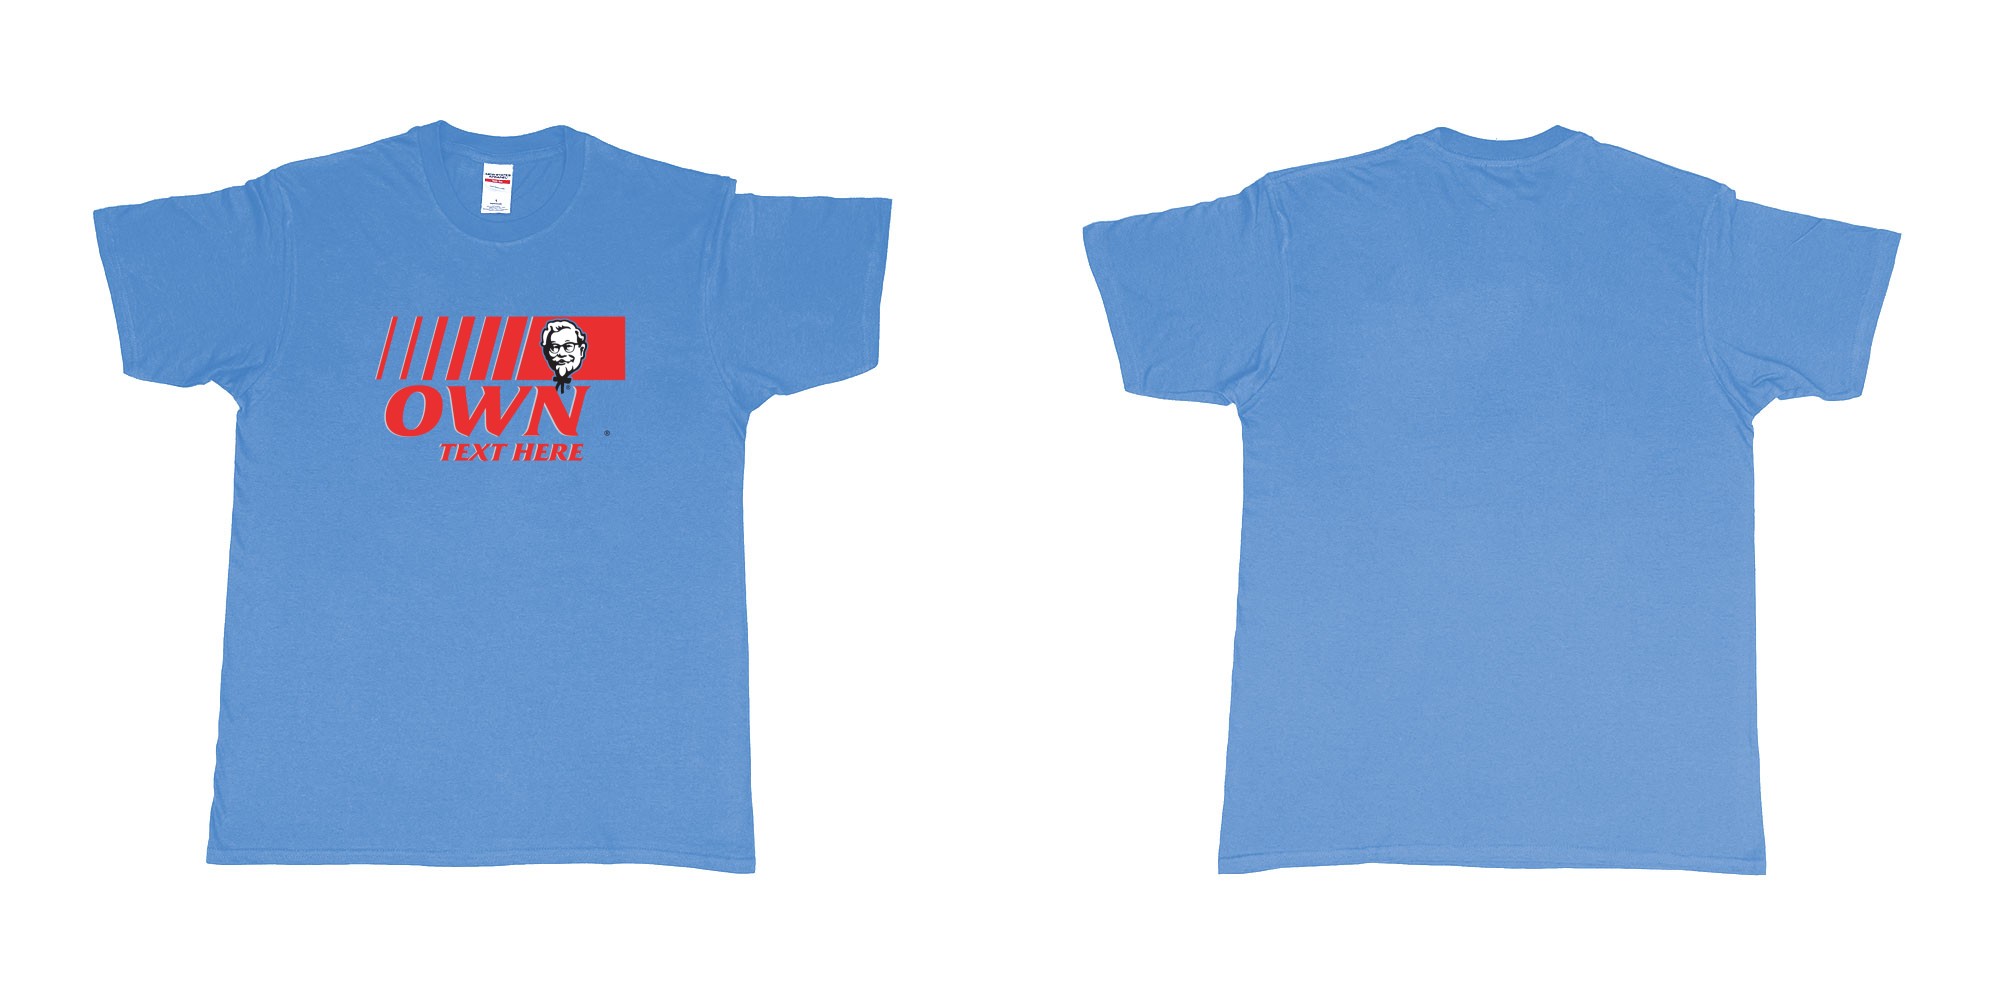 Custom tshirt design KFC in fabric color carolina-blue choice your own text made in Bali by The Pirate Way